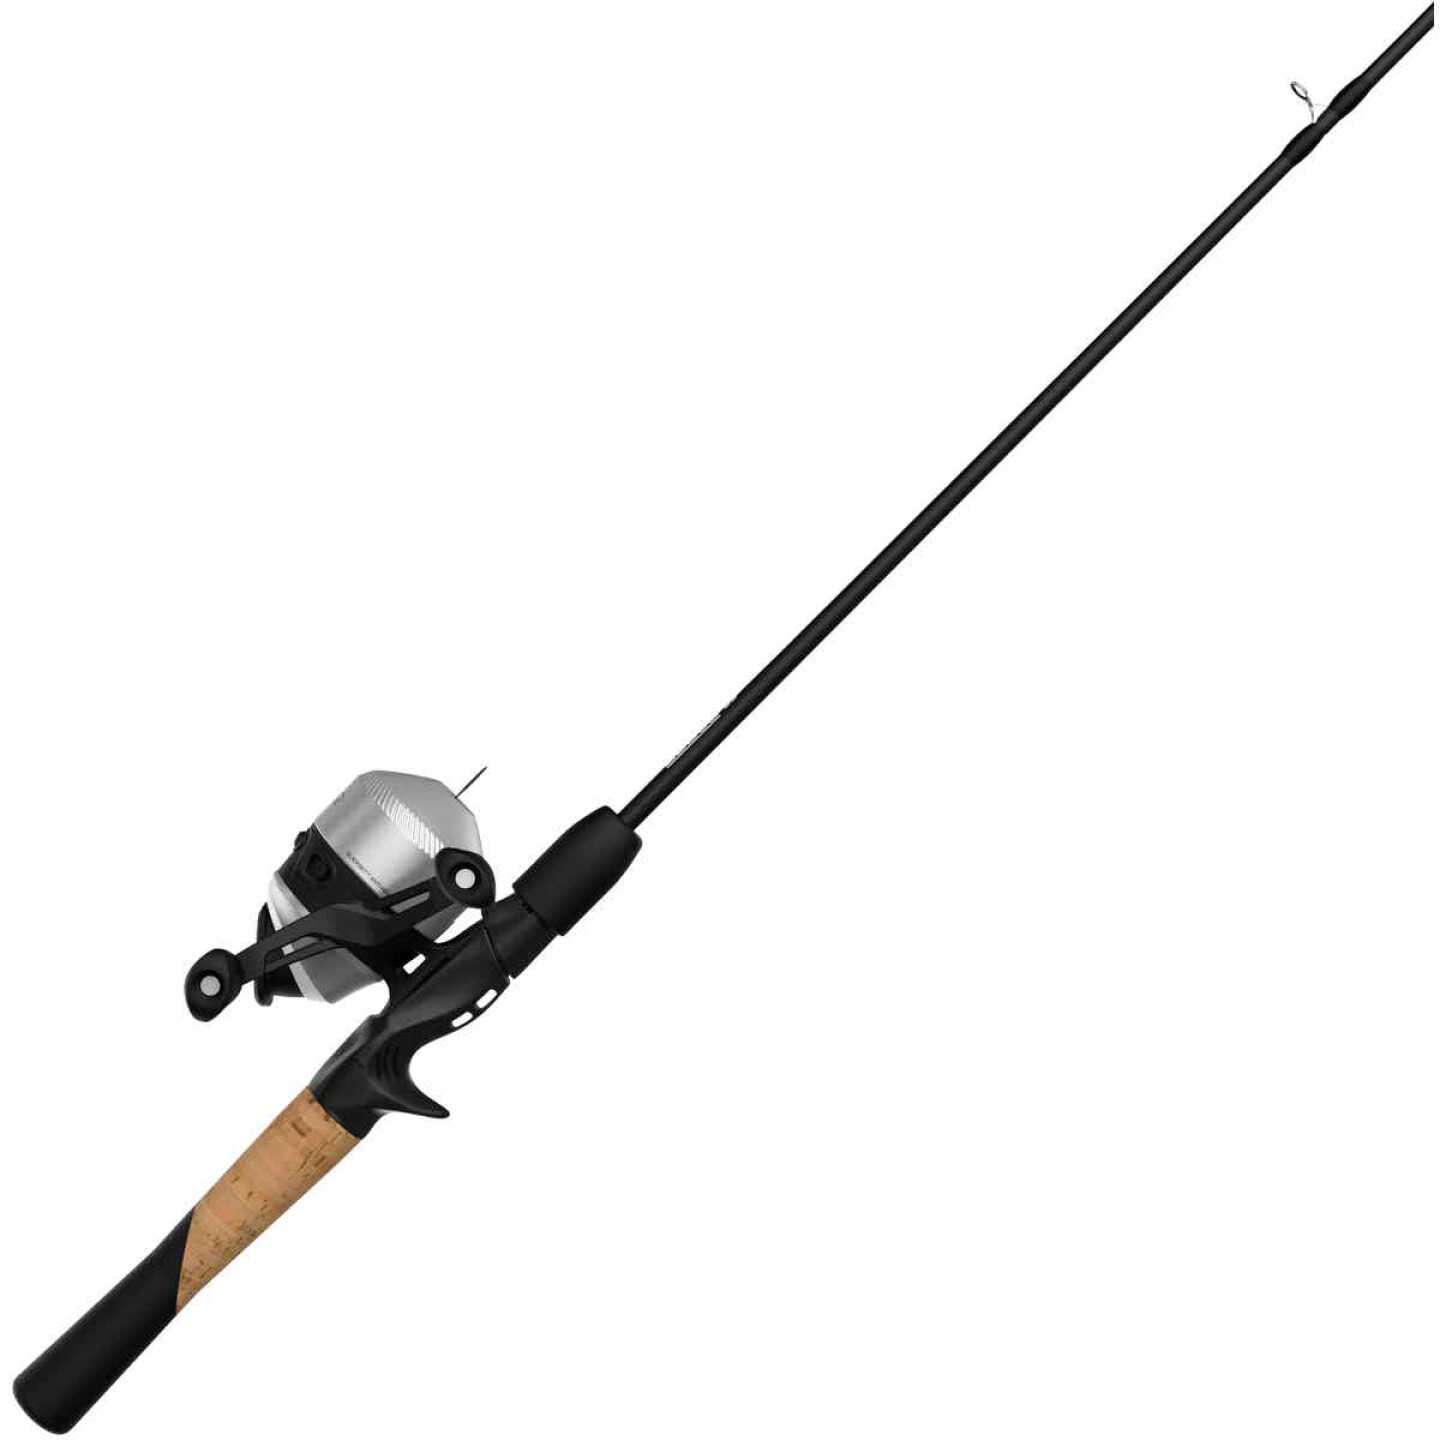 Zebco 33 5 Ft. 6 In. Z-Glass Fishing Rod & Spincast Reel with